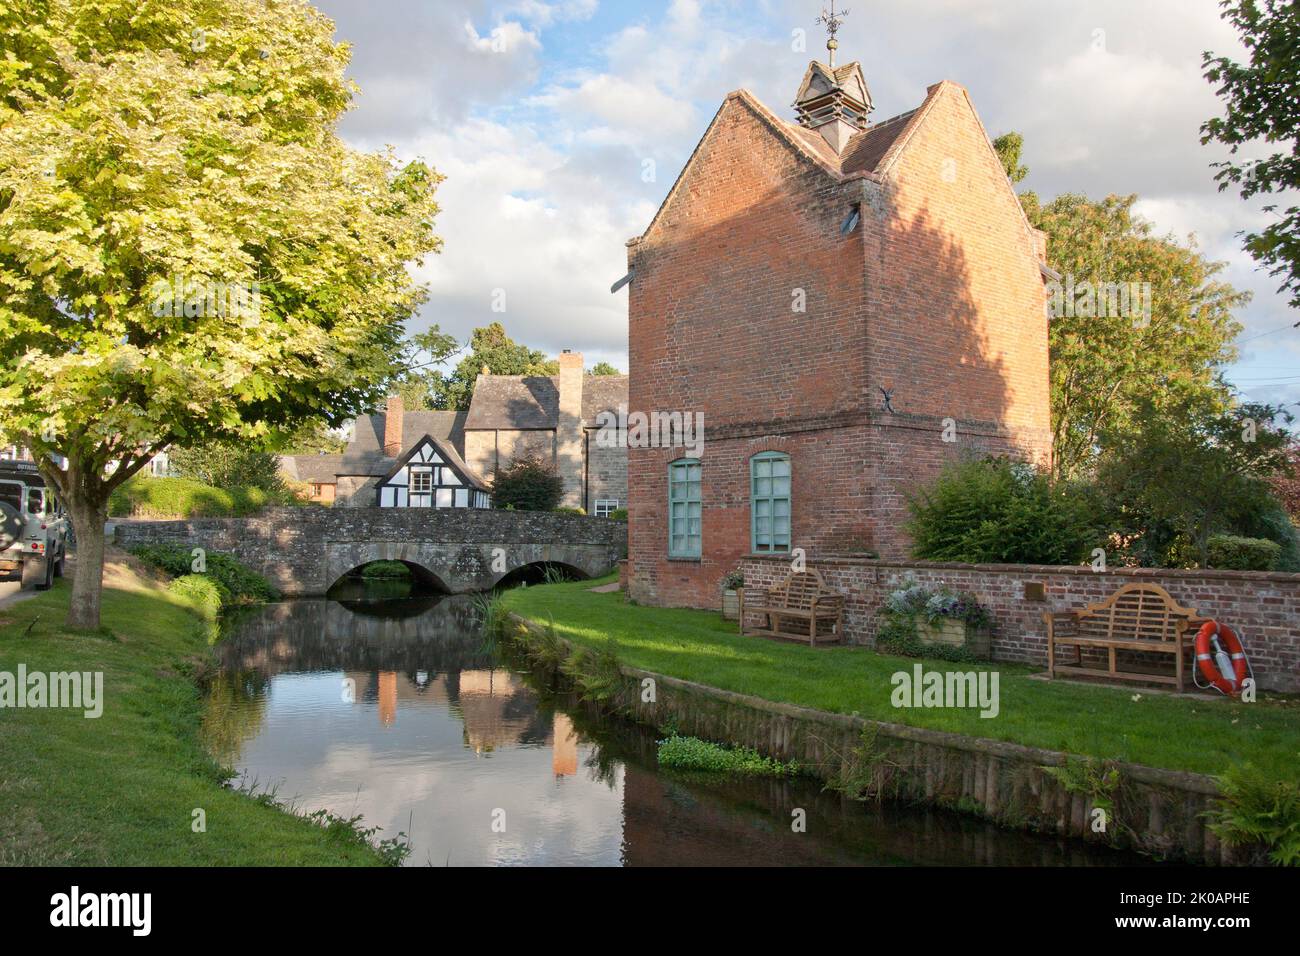 Eardisland picturesque village on the River Arrow with the old dovecote, now a shop, nr Leominster, Herefordshire, England Stock Photo